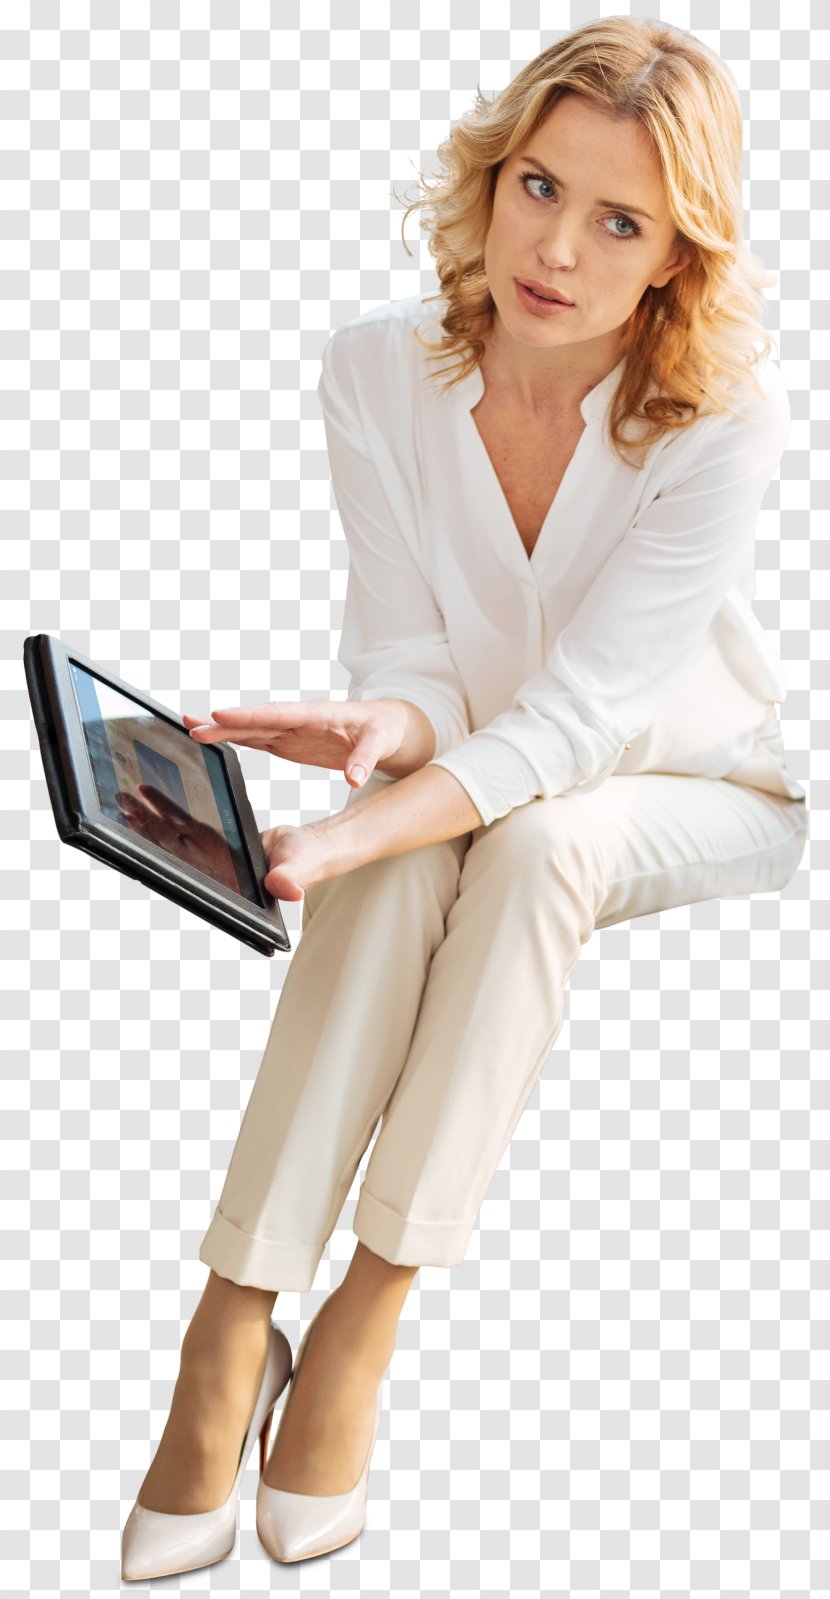 Businessperson Image Drawing - Woman - Business Transparent PNG